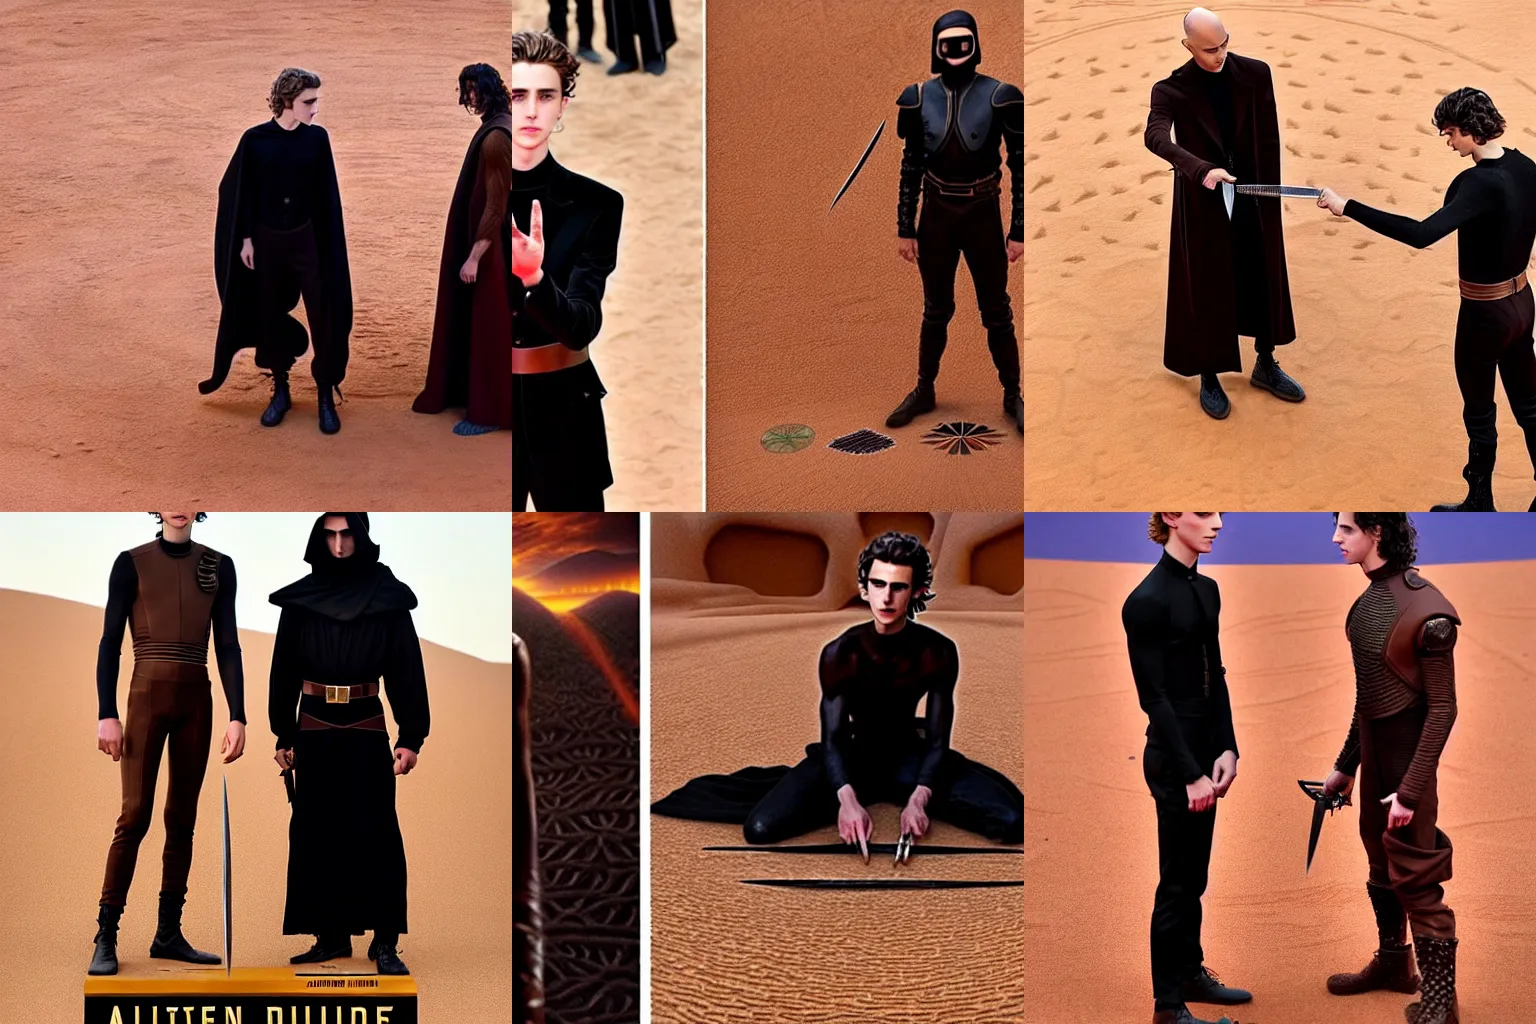 Prompt: Cinematic knife-duel between bald_hairless_Austin_Butler-dressed-in-black and Timothee_Chalamet_dressed-in-brown-felt, on a mosaic floor dais, inspired by Dune 2020, detailed faces